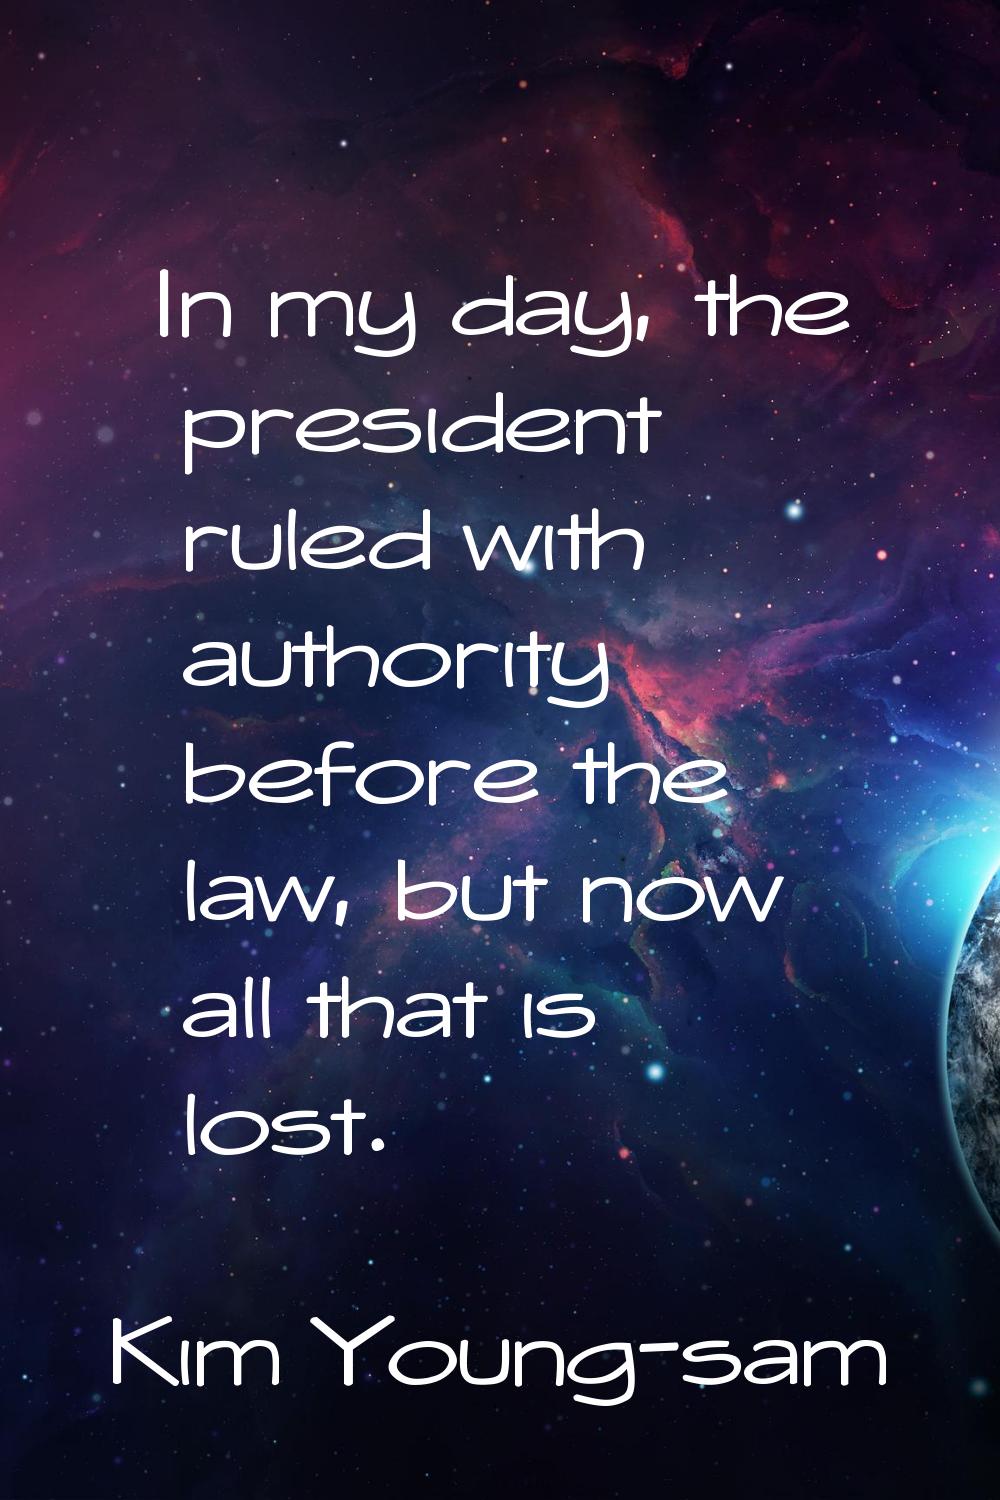 In my day, the president ruled with authority before the law, but now all that is lost.